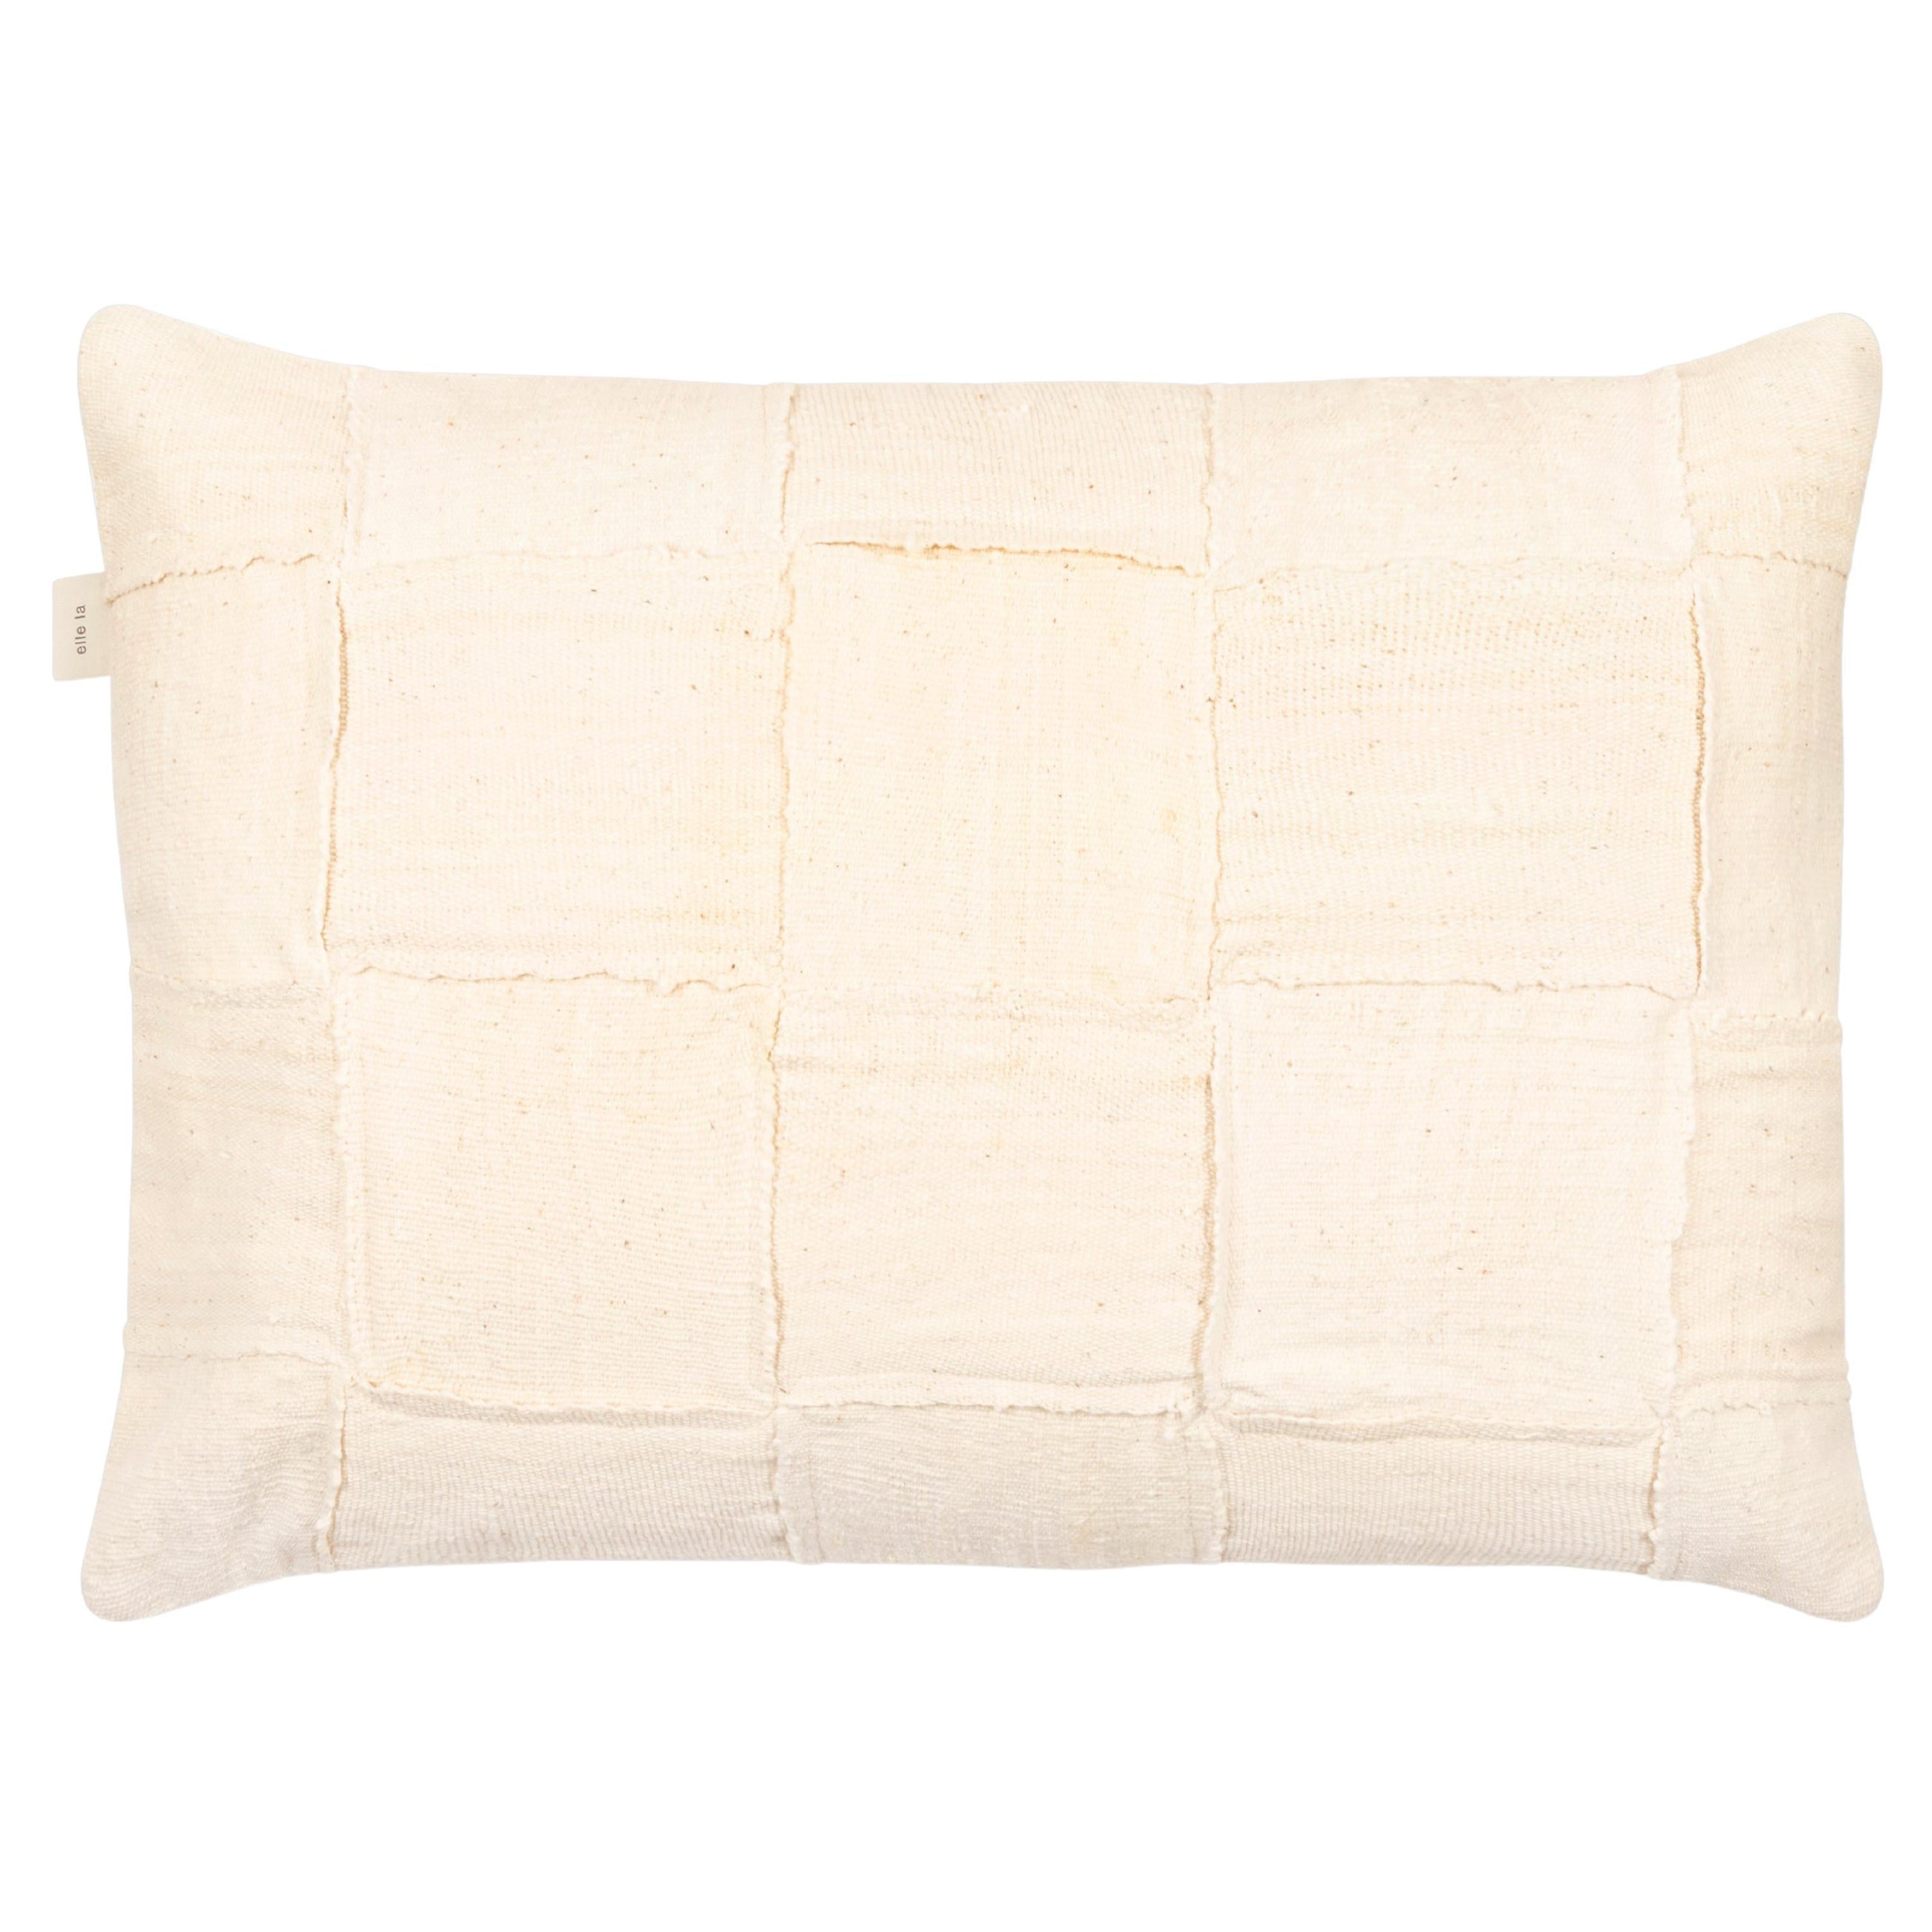 White Organic Cushion Cover Handwoven in Mali For Sale